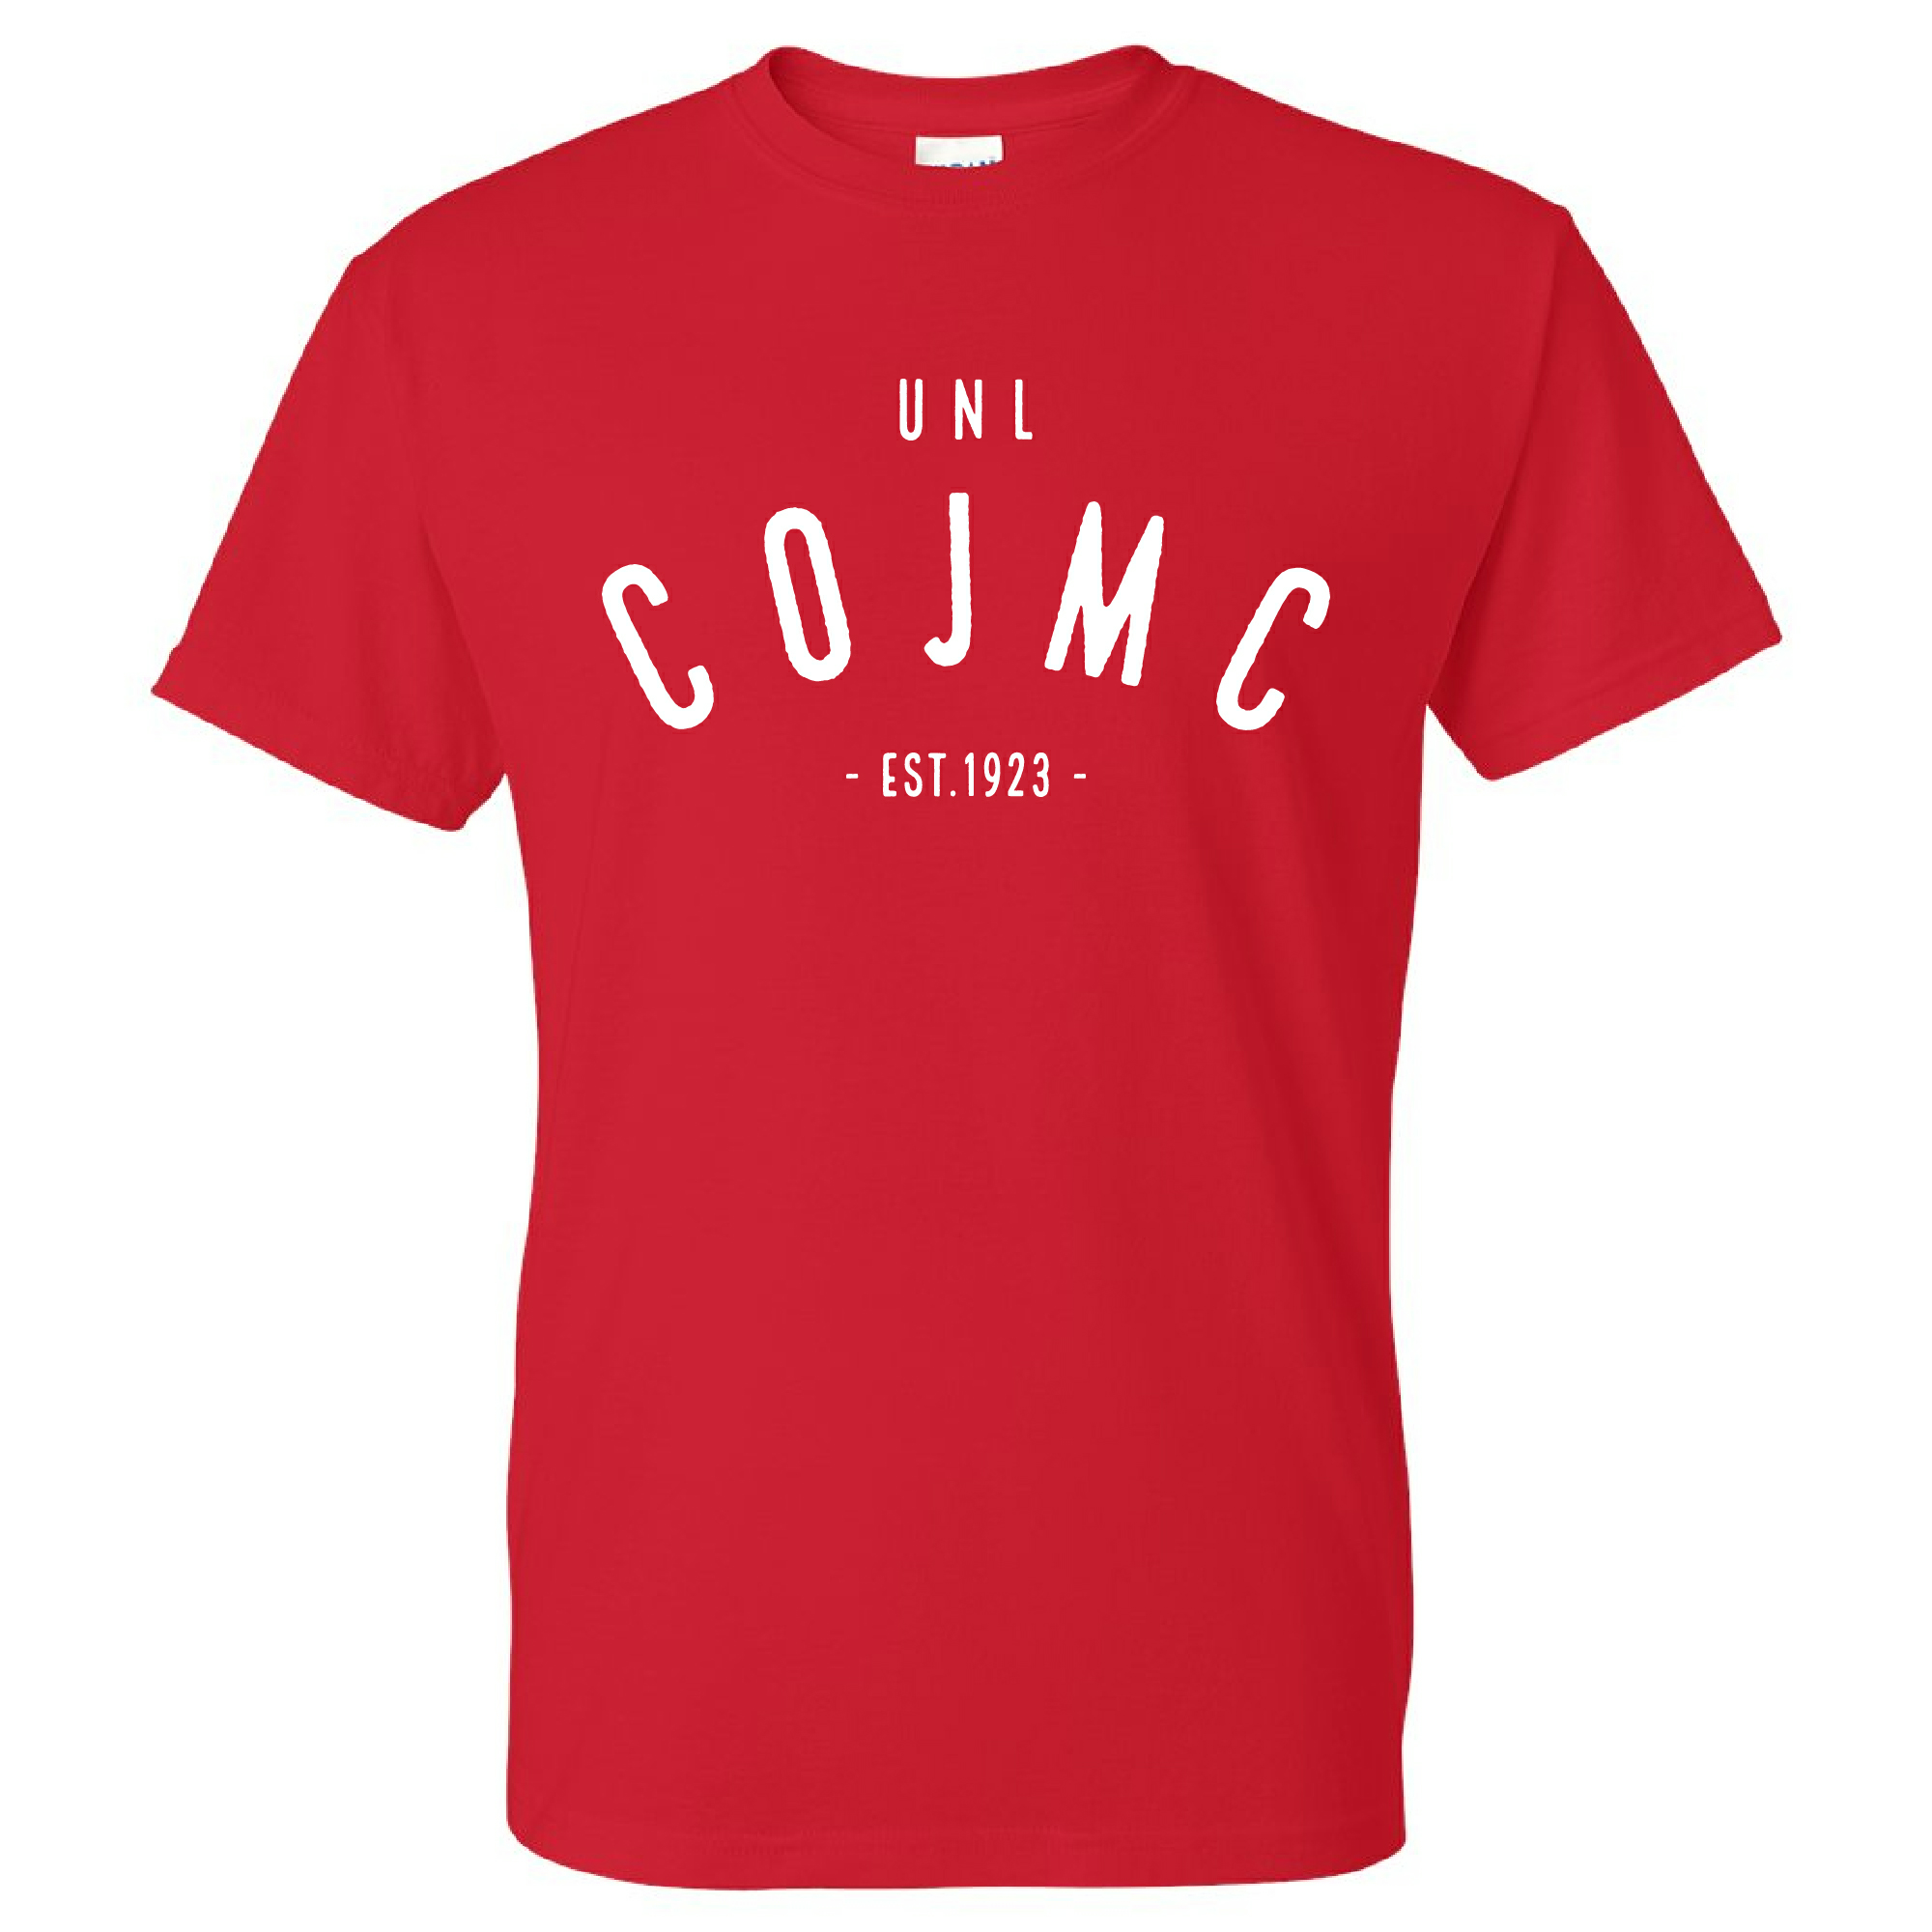 T-shirts can be ordered at https://stores.inksoft.com/unl_cojmc/shop/product-detail/27494675.